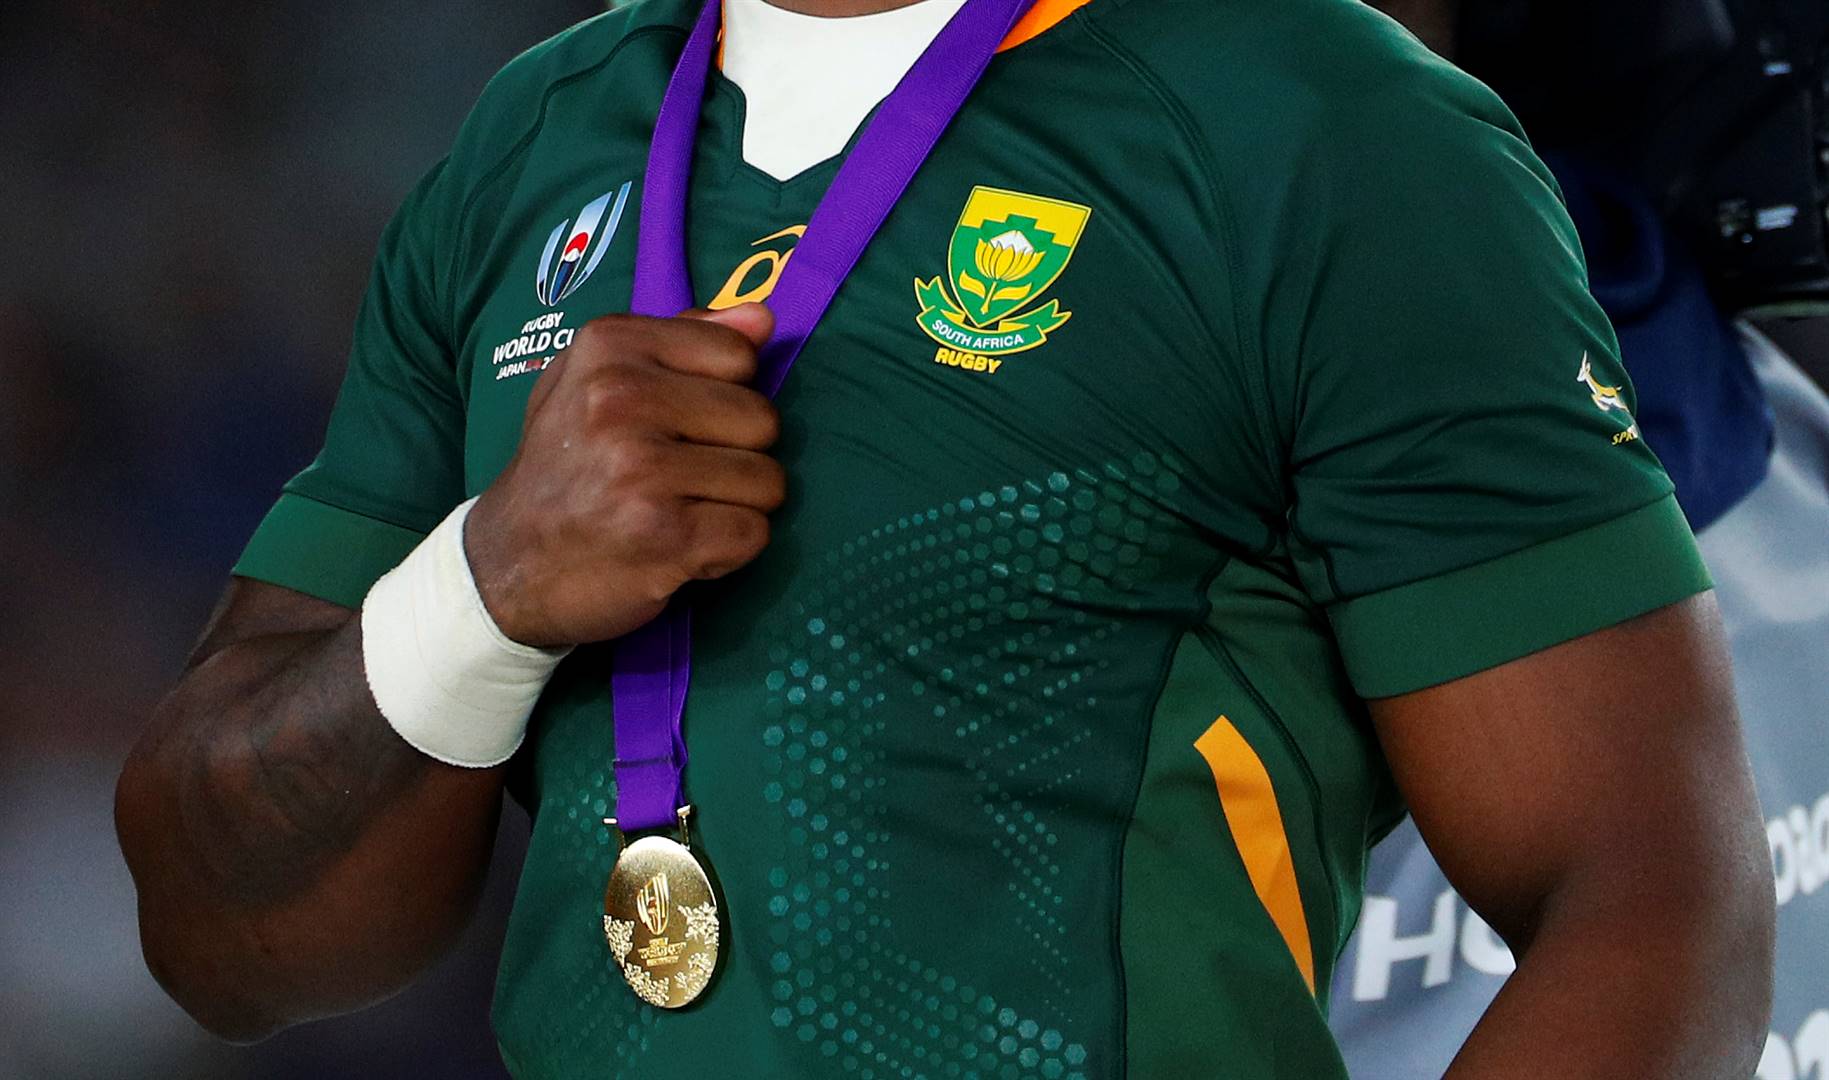  In his speech after South Africa’s incredible Rugby World Cup win over England, captain Siya Kolisi spoke about working together as one and achieving great things. It was the theme that President Cyril Ramaphosa followed up with in his Monday newsletter to the country. Picture: Lynne Cameron/Getty Images